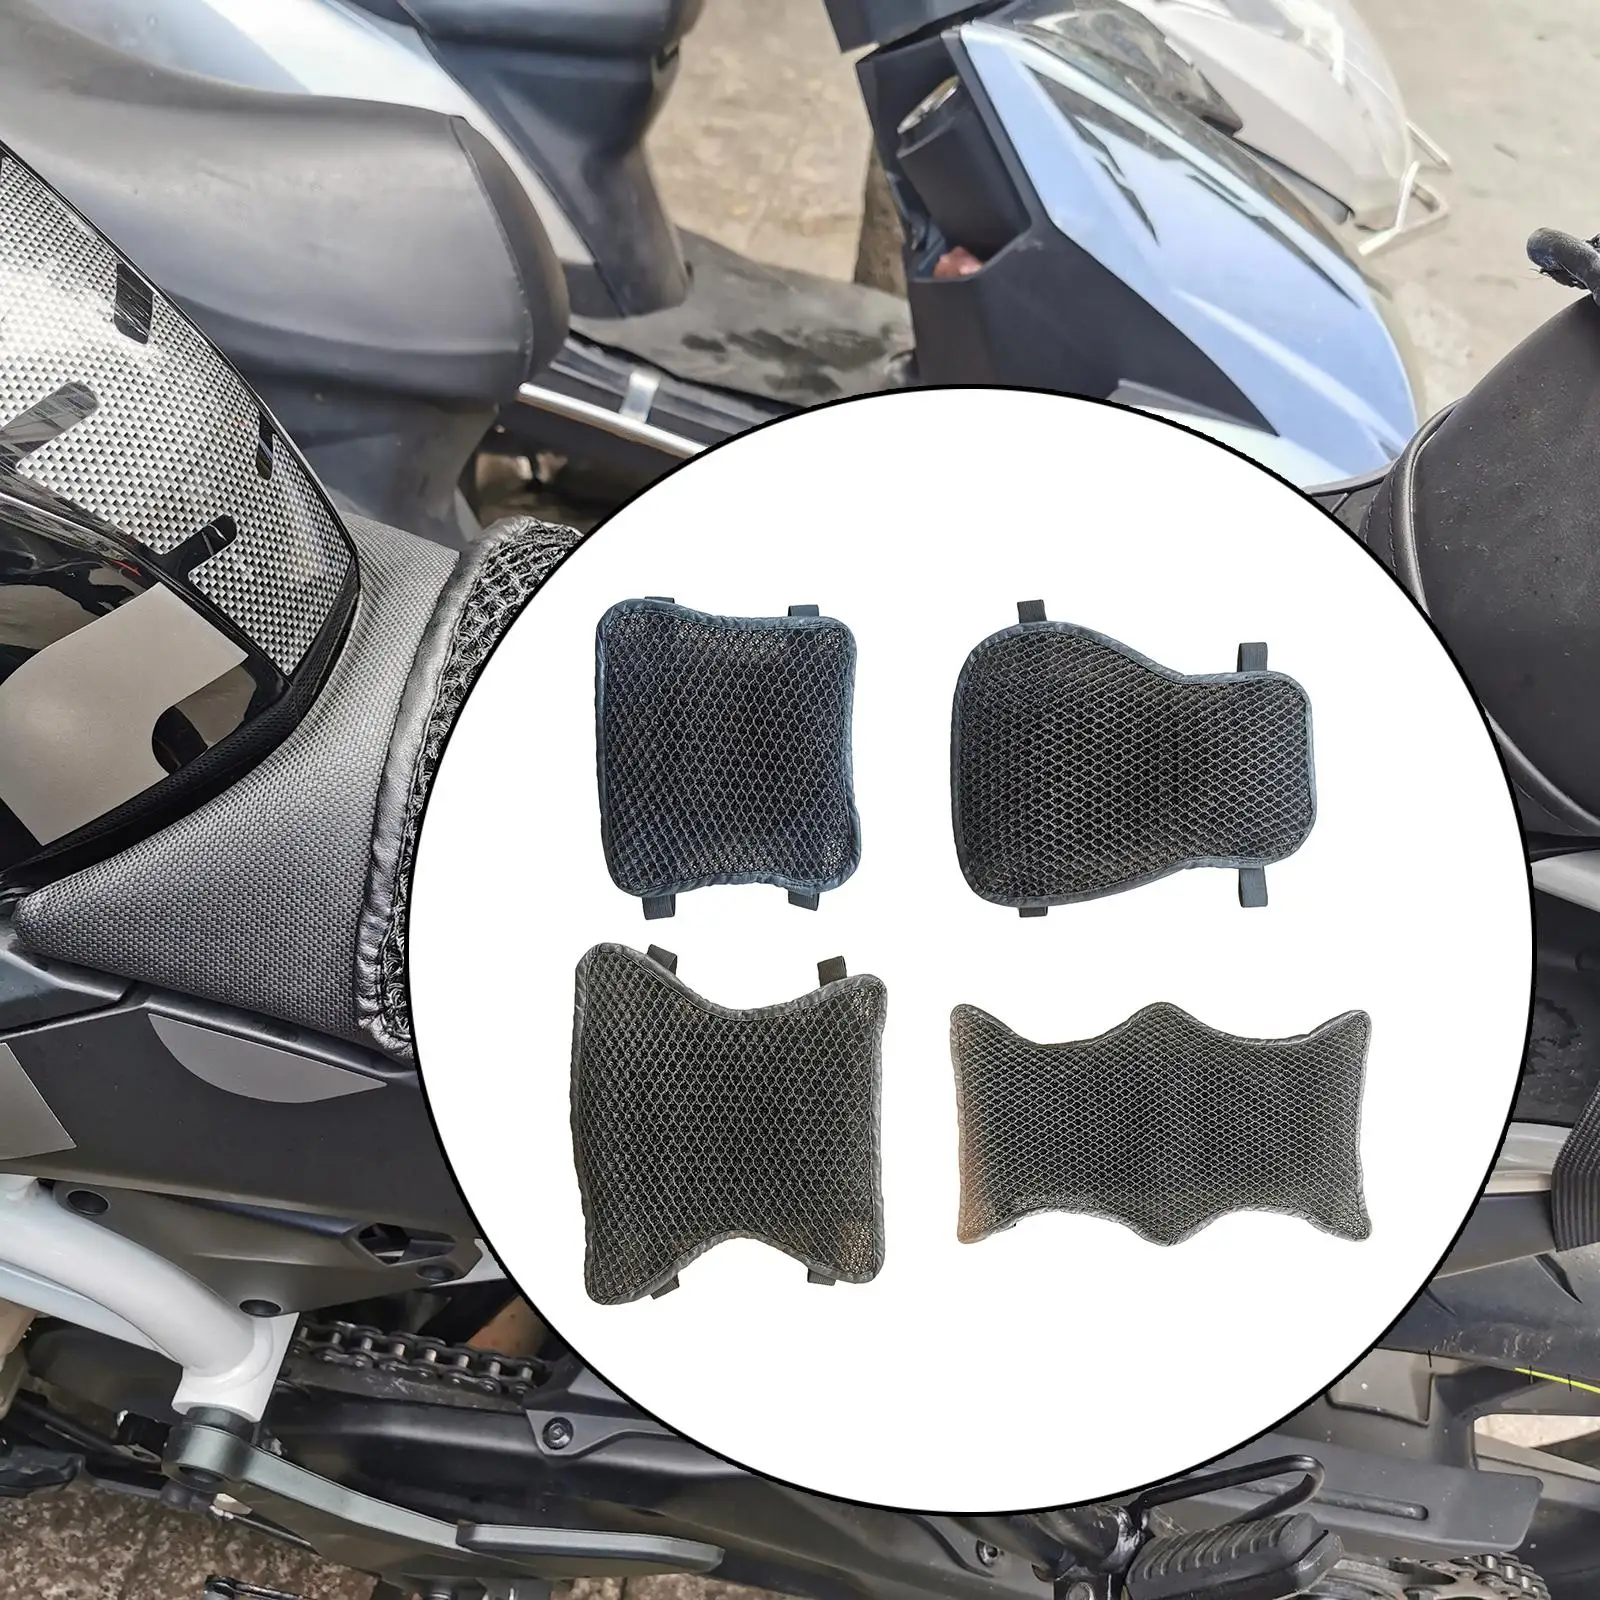 Motorcycle Seat Cushion Reduces Pressure Anti-Slip Fits for Long Rides Sport